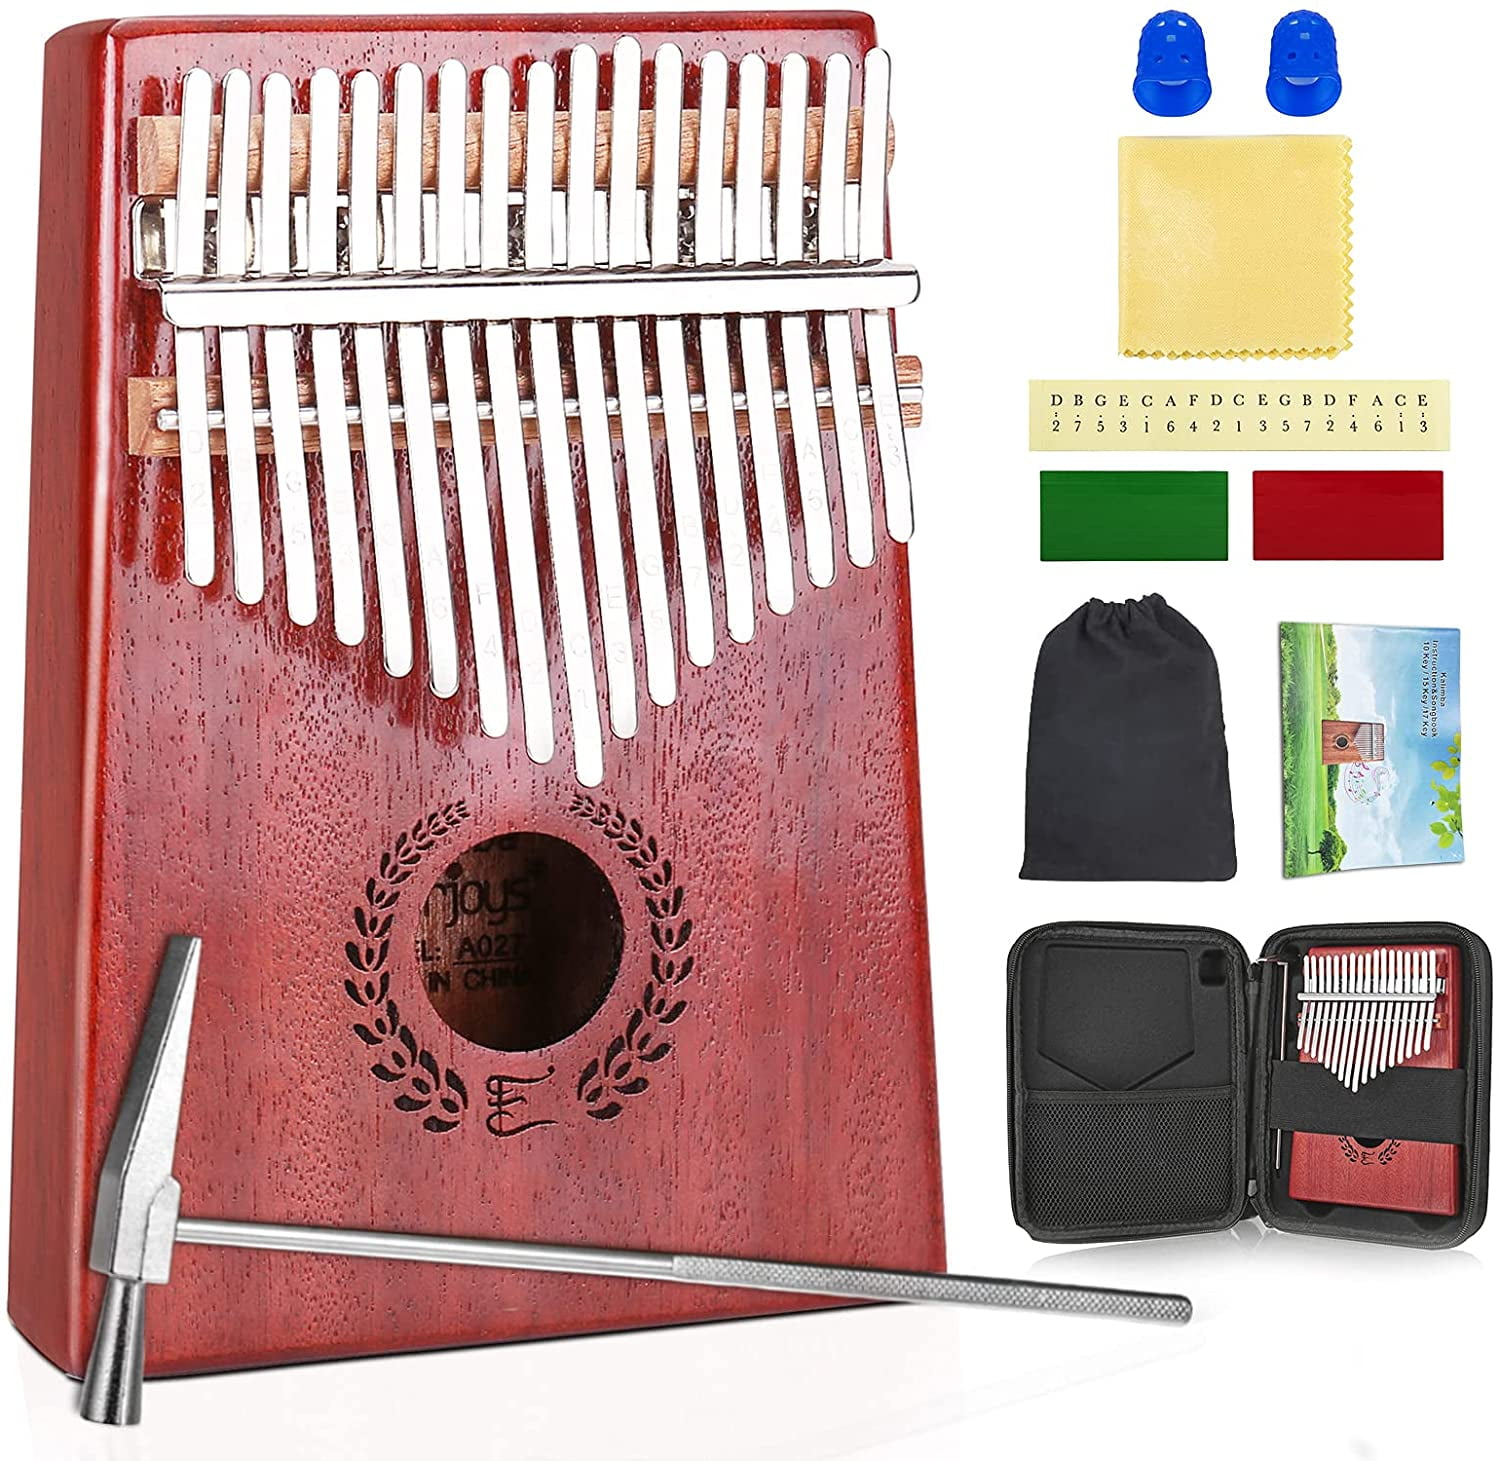 Kalimba 17 Keys Thumb Piano Natural Wood with basic course Tune Hammer for Adult Kids Beginners for Gifts 